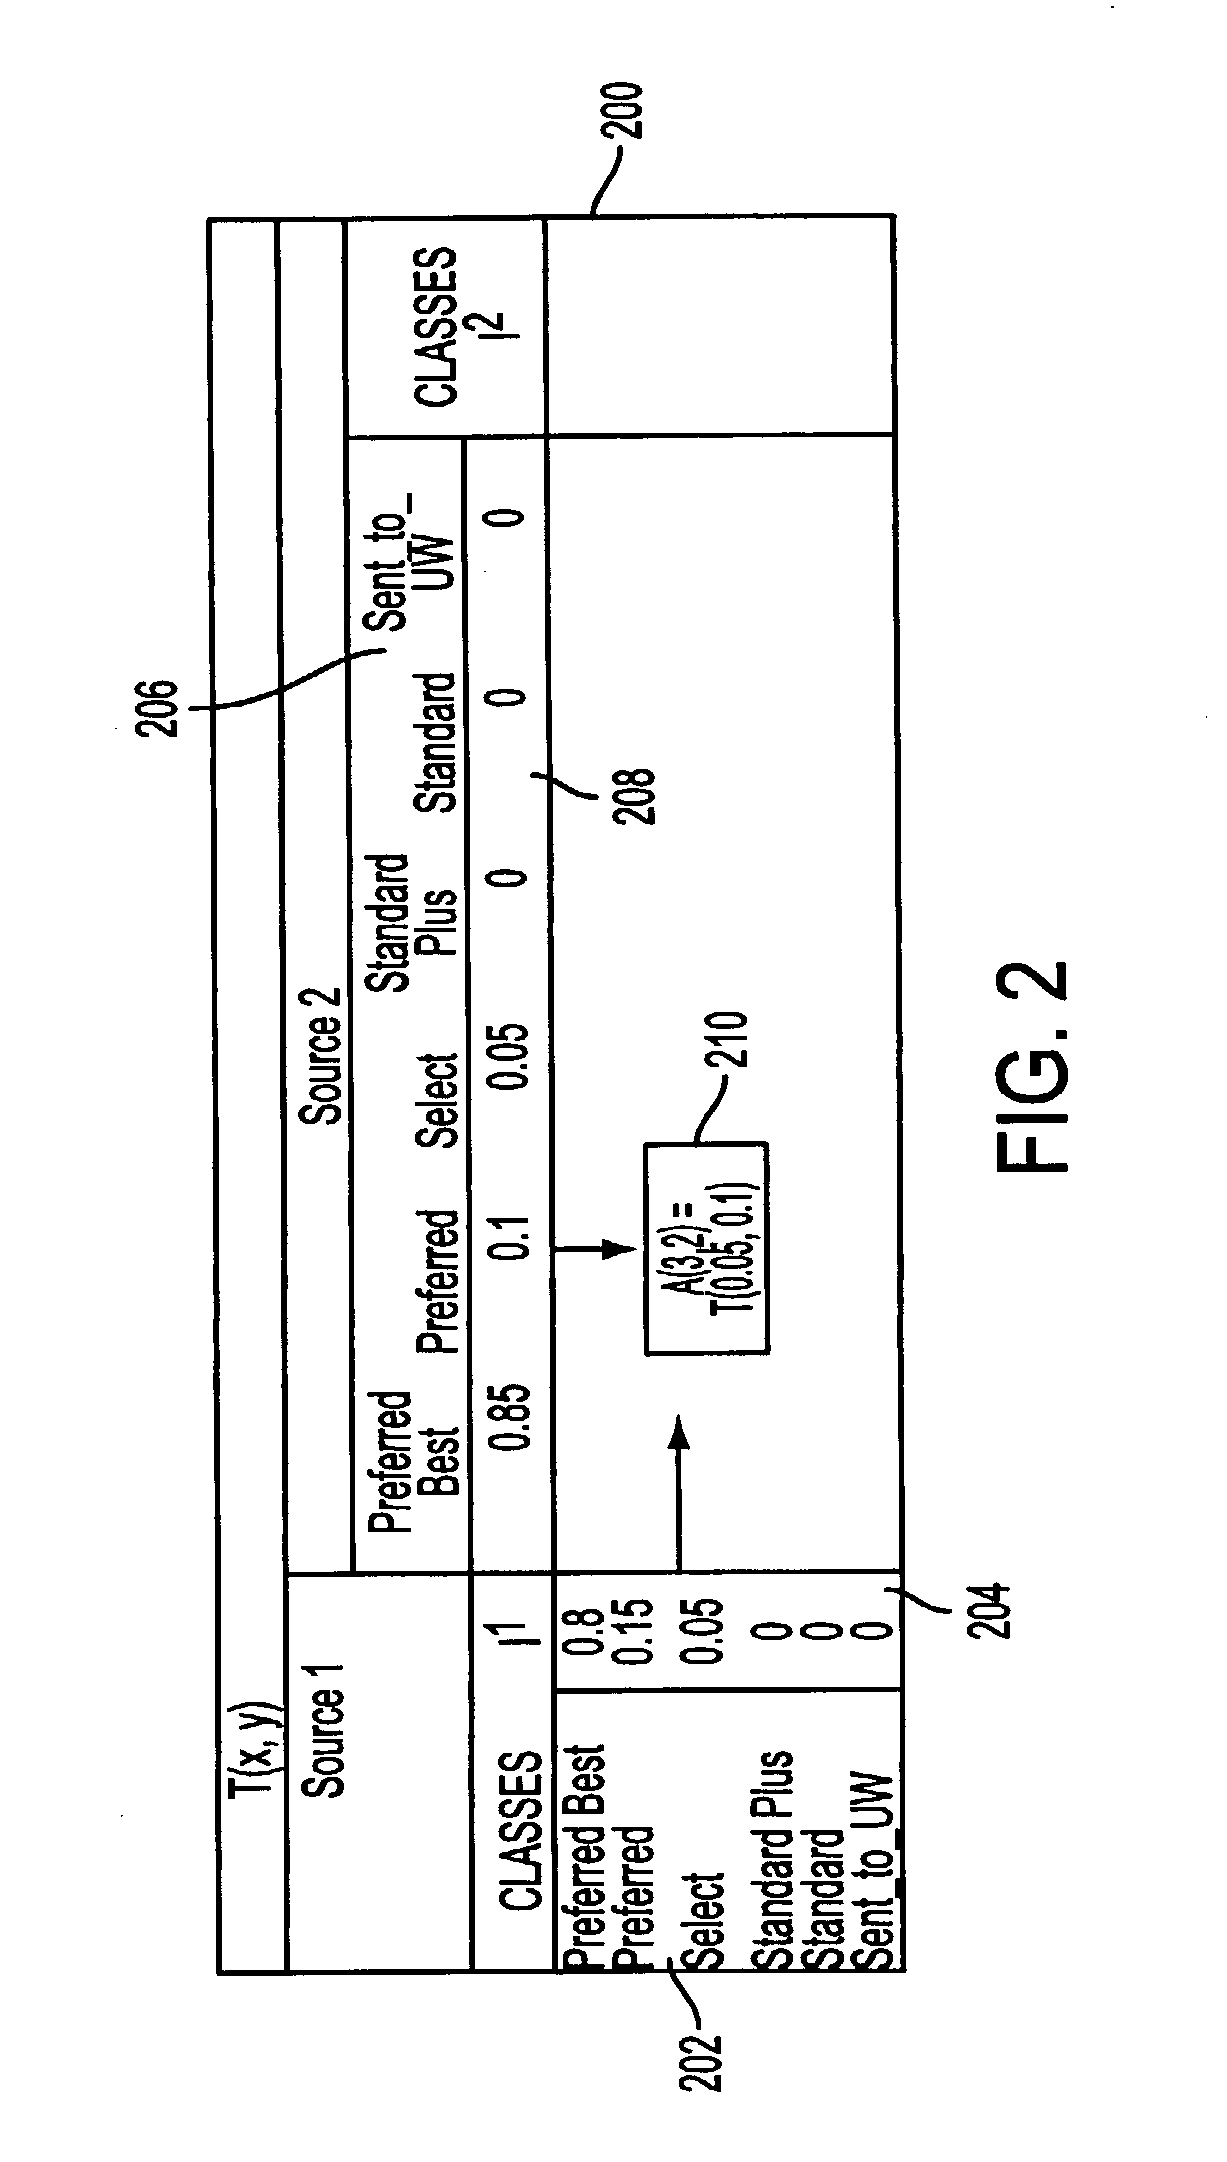 System and process for detecting outliers for insurance underwriting suitable for use by an automated system